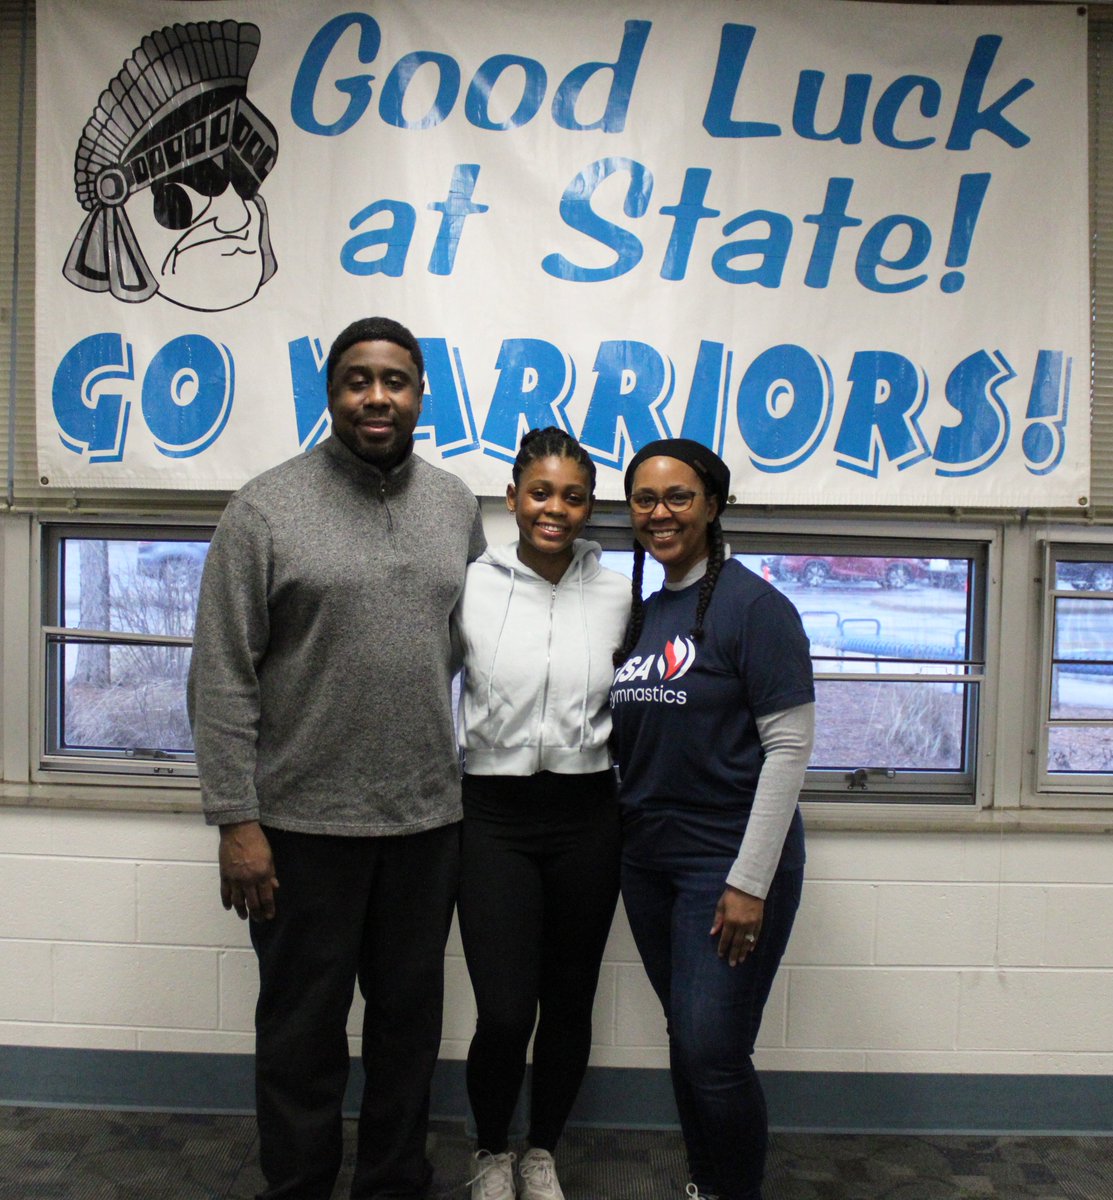 On Feb. 15, @WillowbrookHS1 hosted a State send-off celebration for junior Naomi Campbell, who competed in the @IHSA_IL Girls Gymnastics State Meet. Read more, and watch a video of the celebration, at dupage88.net/site/page/16029.